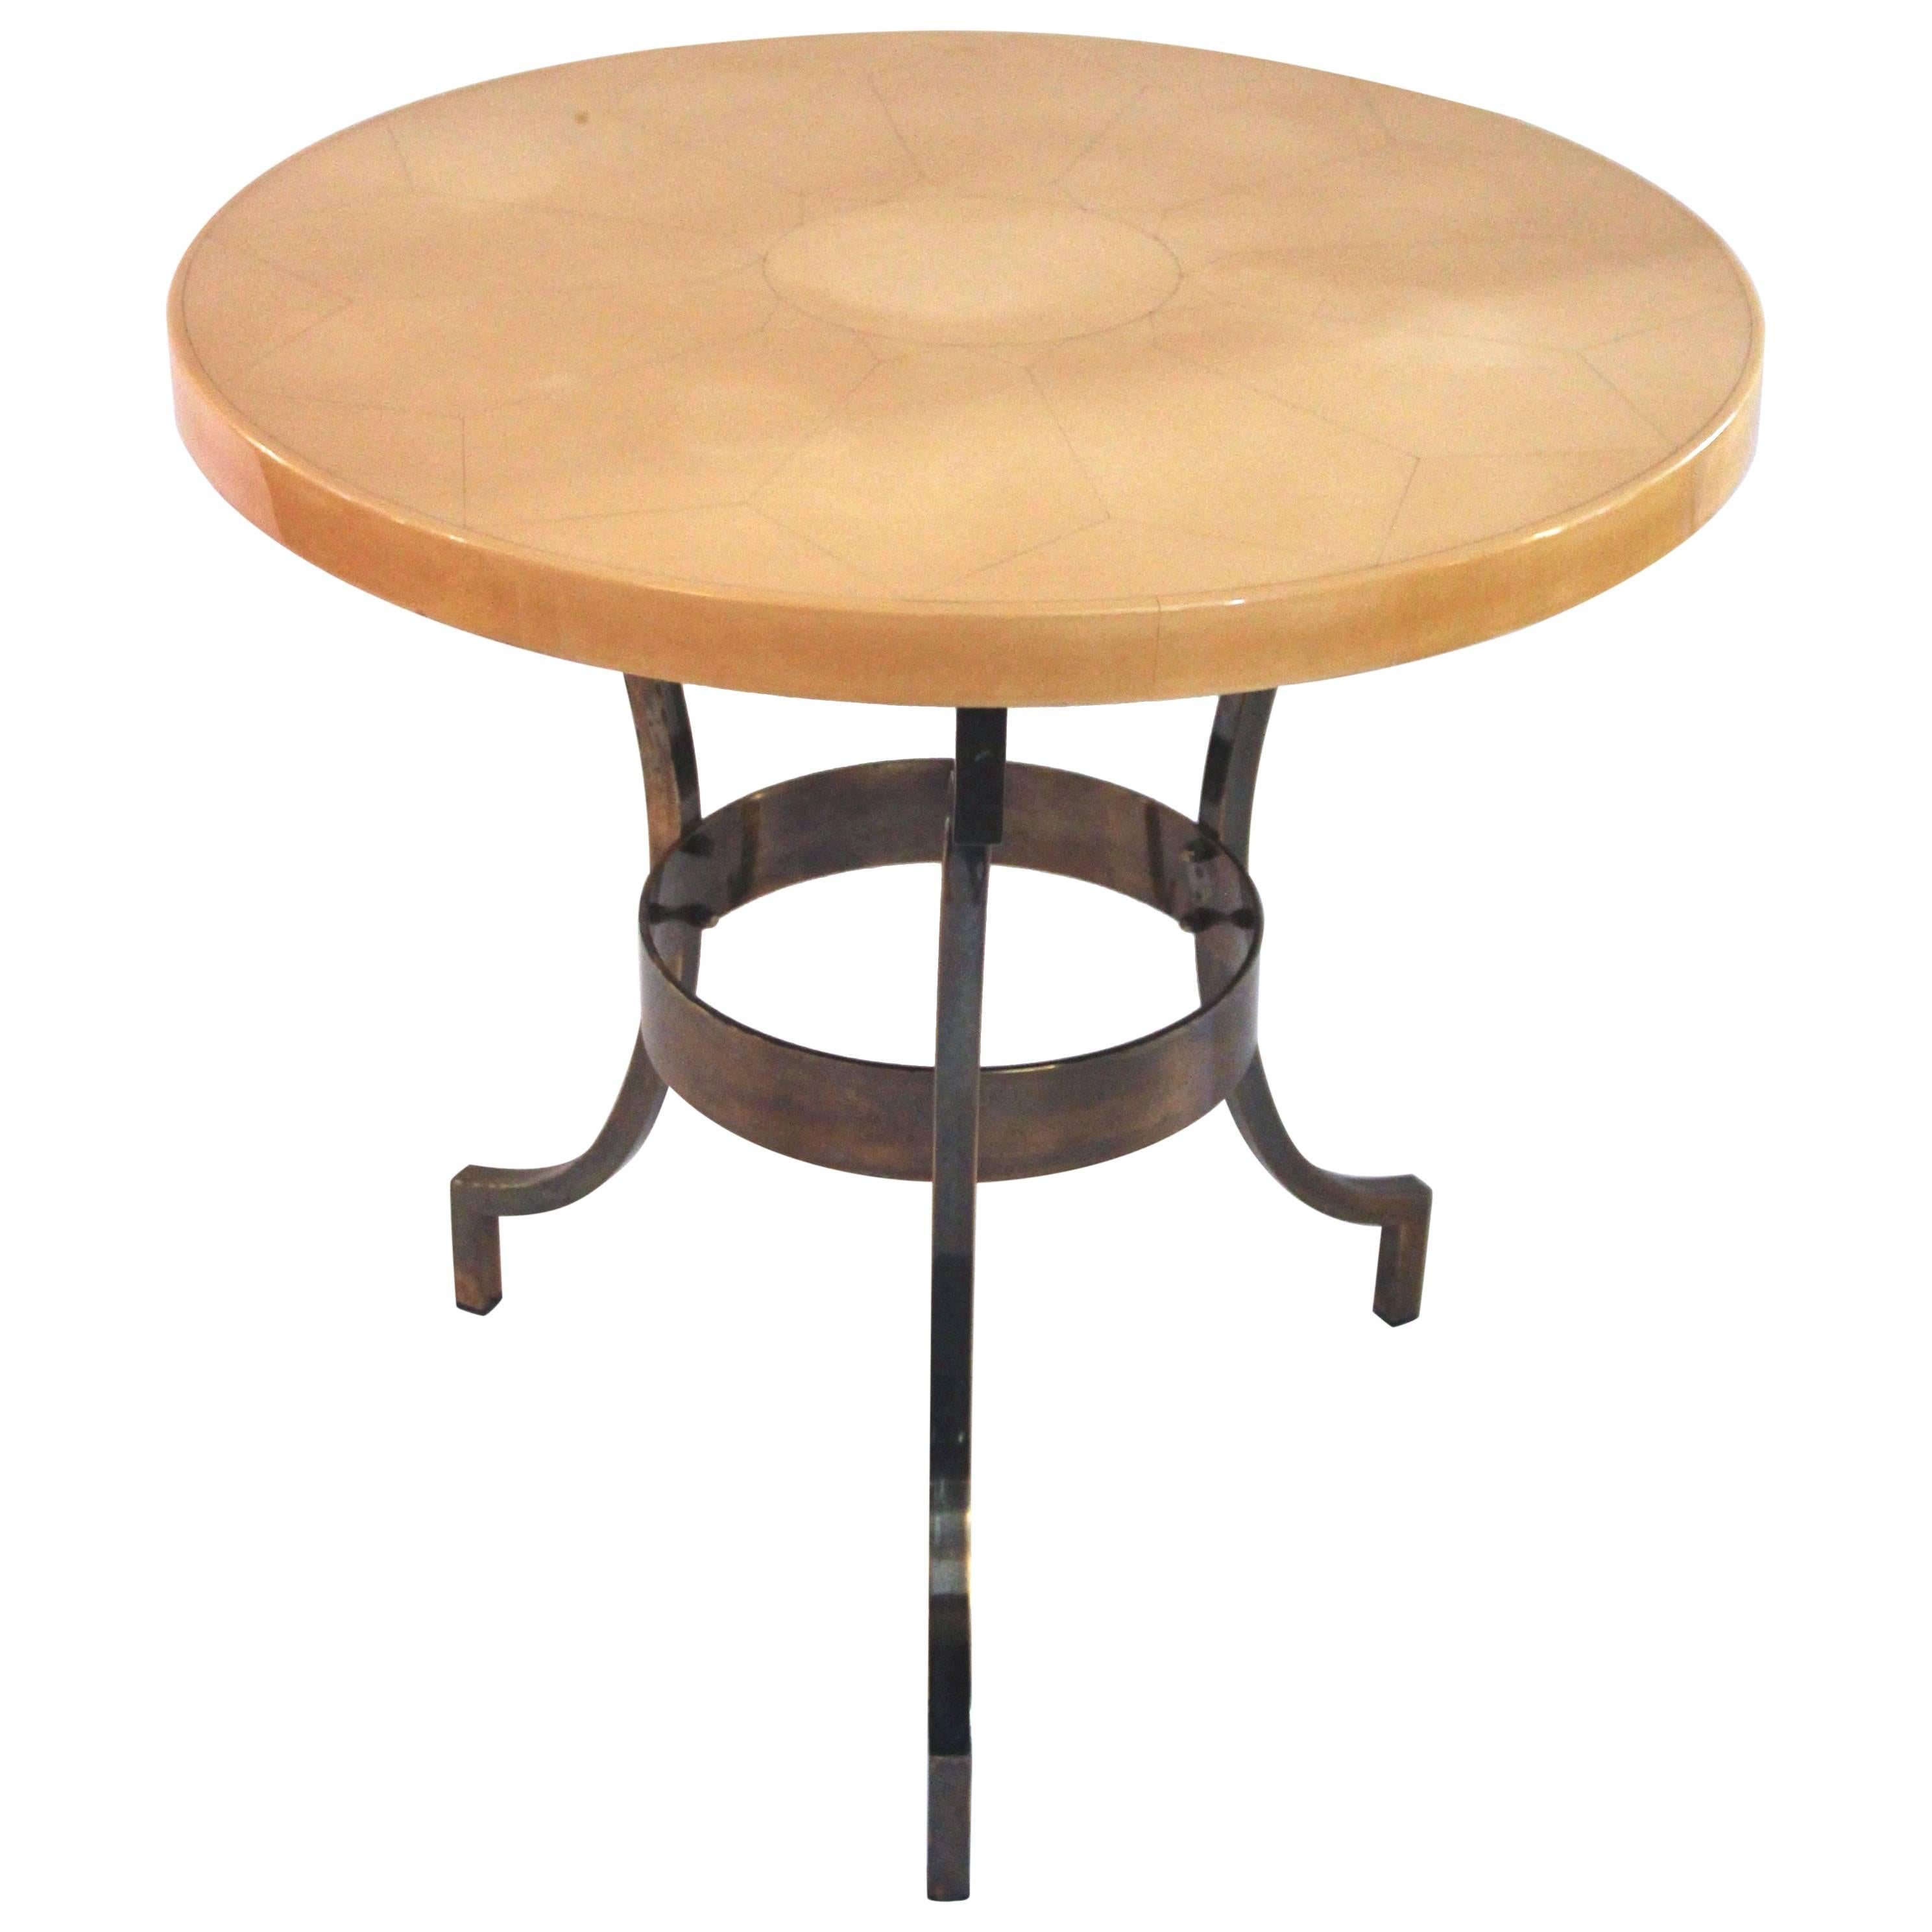 Maison Jansen, Pedestal Table, Lacquered Wood and Iron Base, France, circa 1970